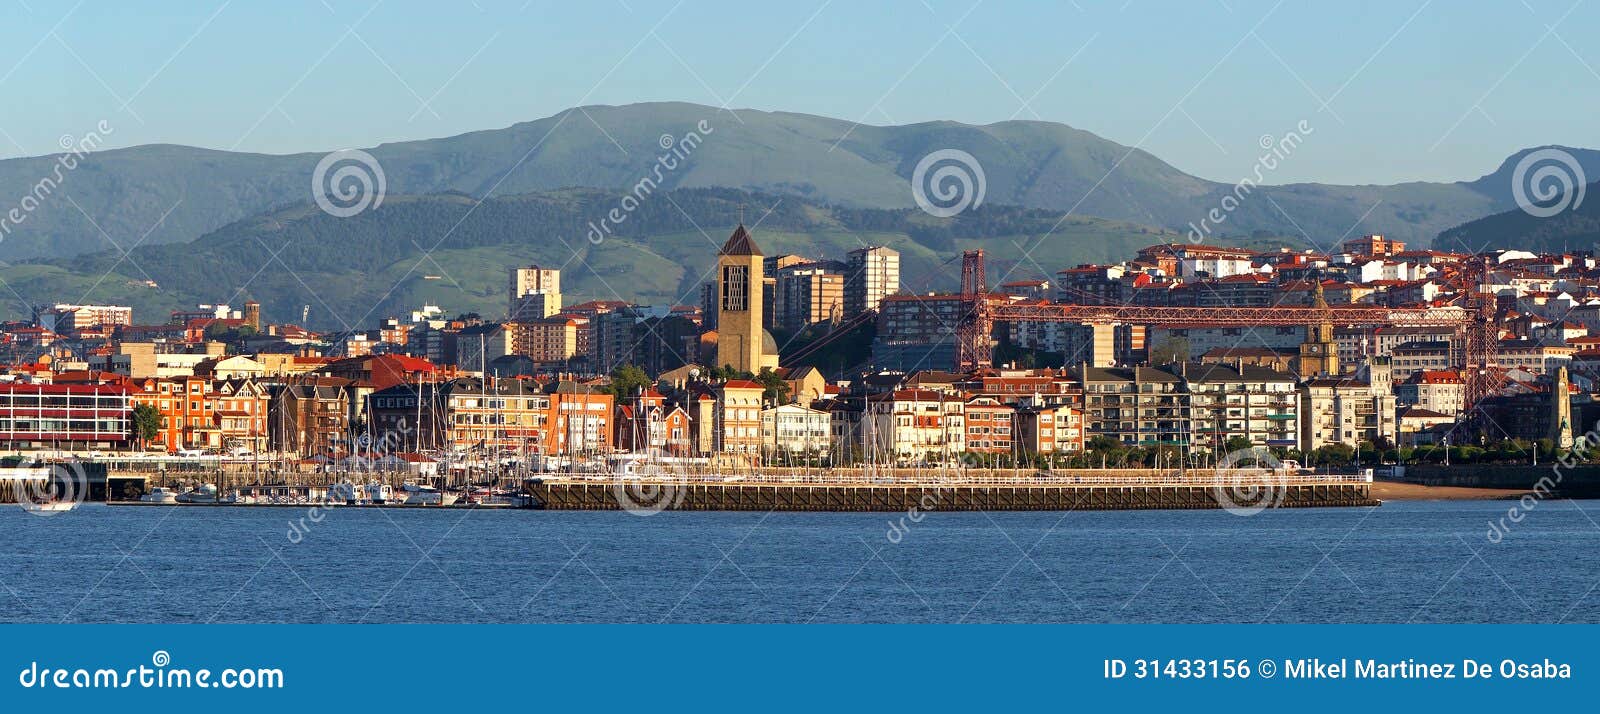 seafront and pier of getxo